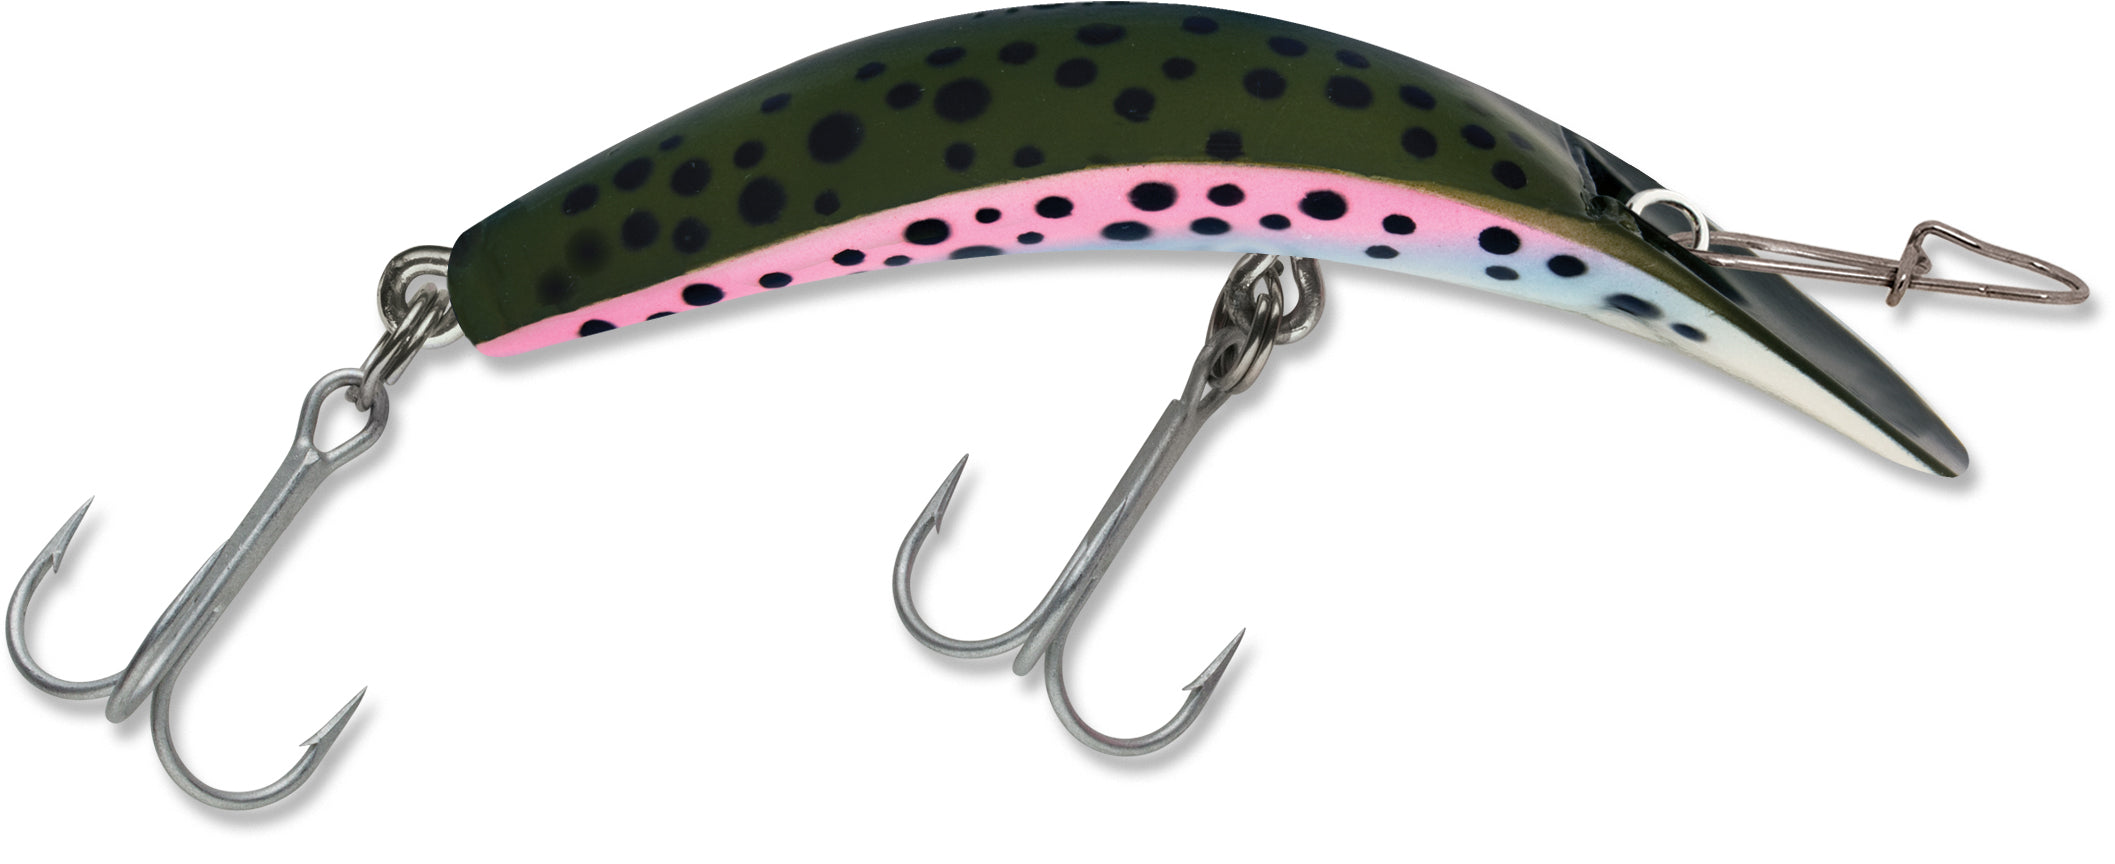 Luhr Jensen Kwikfish Rattle K15 Green Chartreuse Dual Dots Jagged Tooth  Tackle